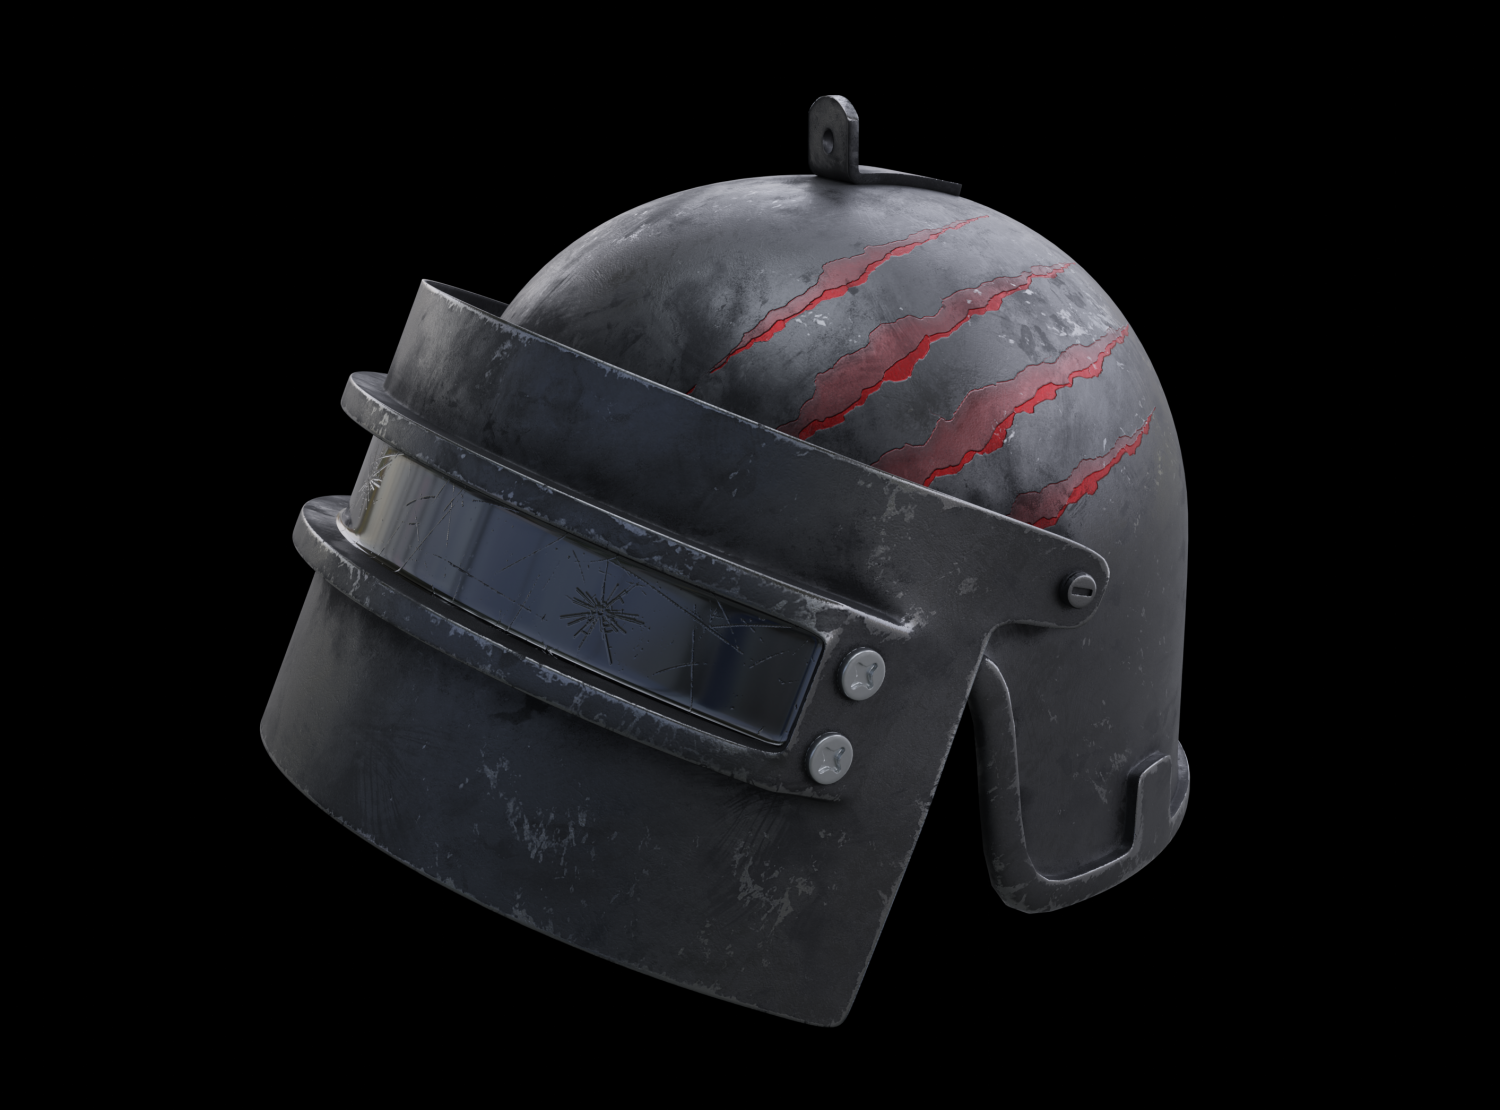 How To Make PUBG Level 3 Helmet From Cardboard